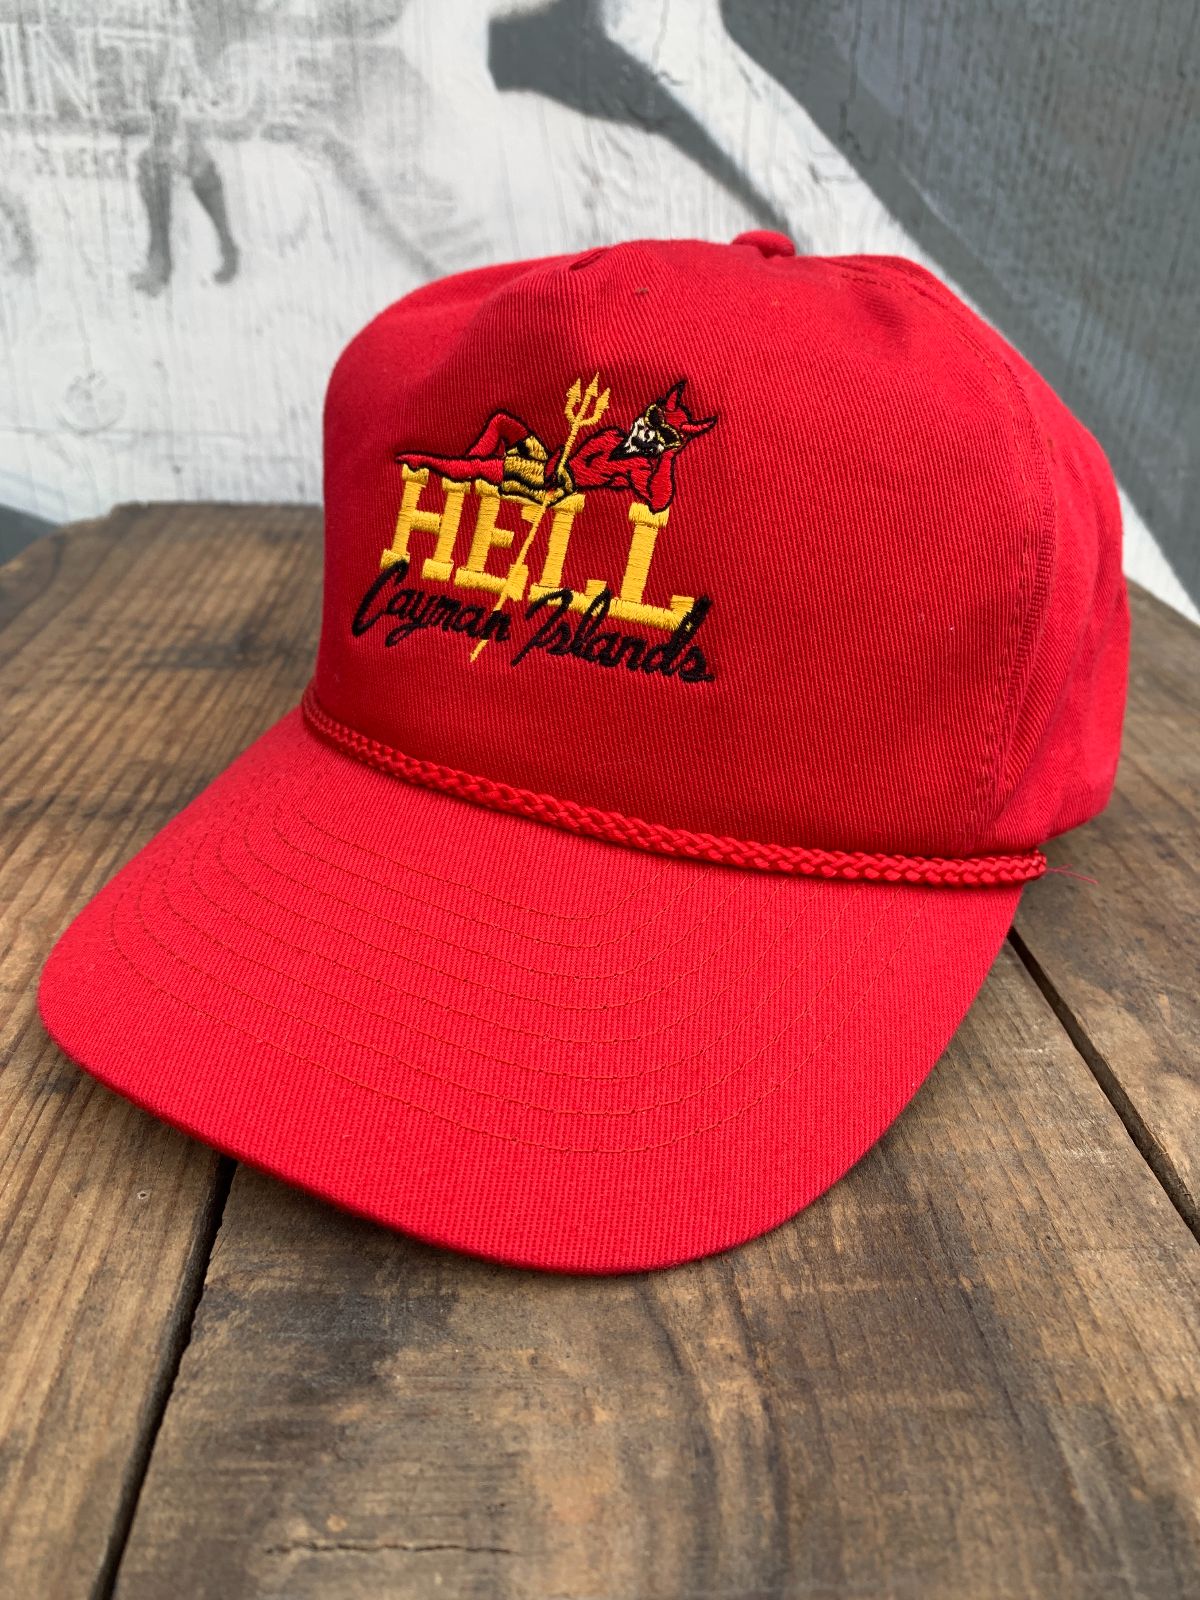 product details: HELL CAYMAN ISLANDS SEXY DEVIL EMBROIDERED SNAPBACK HAT photo